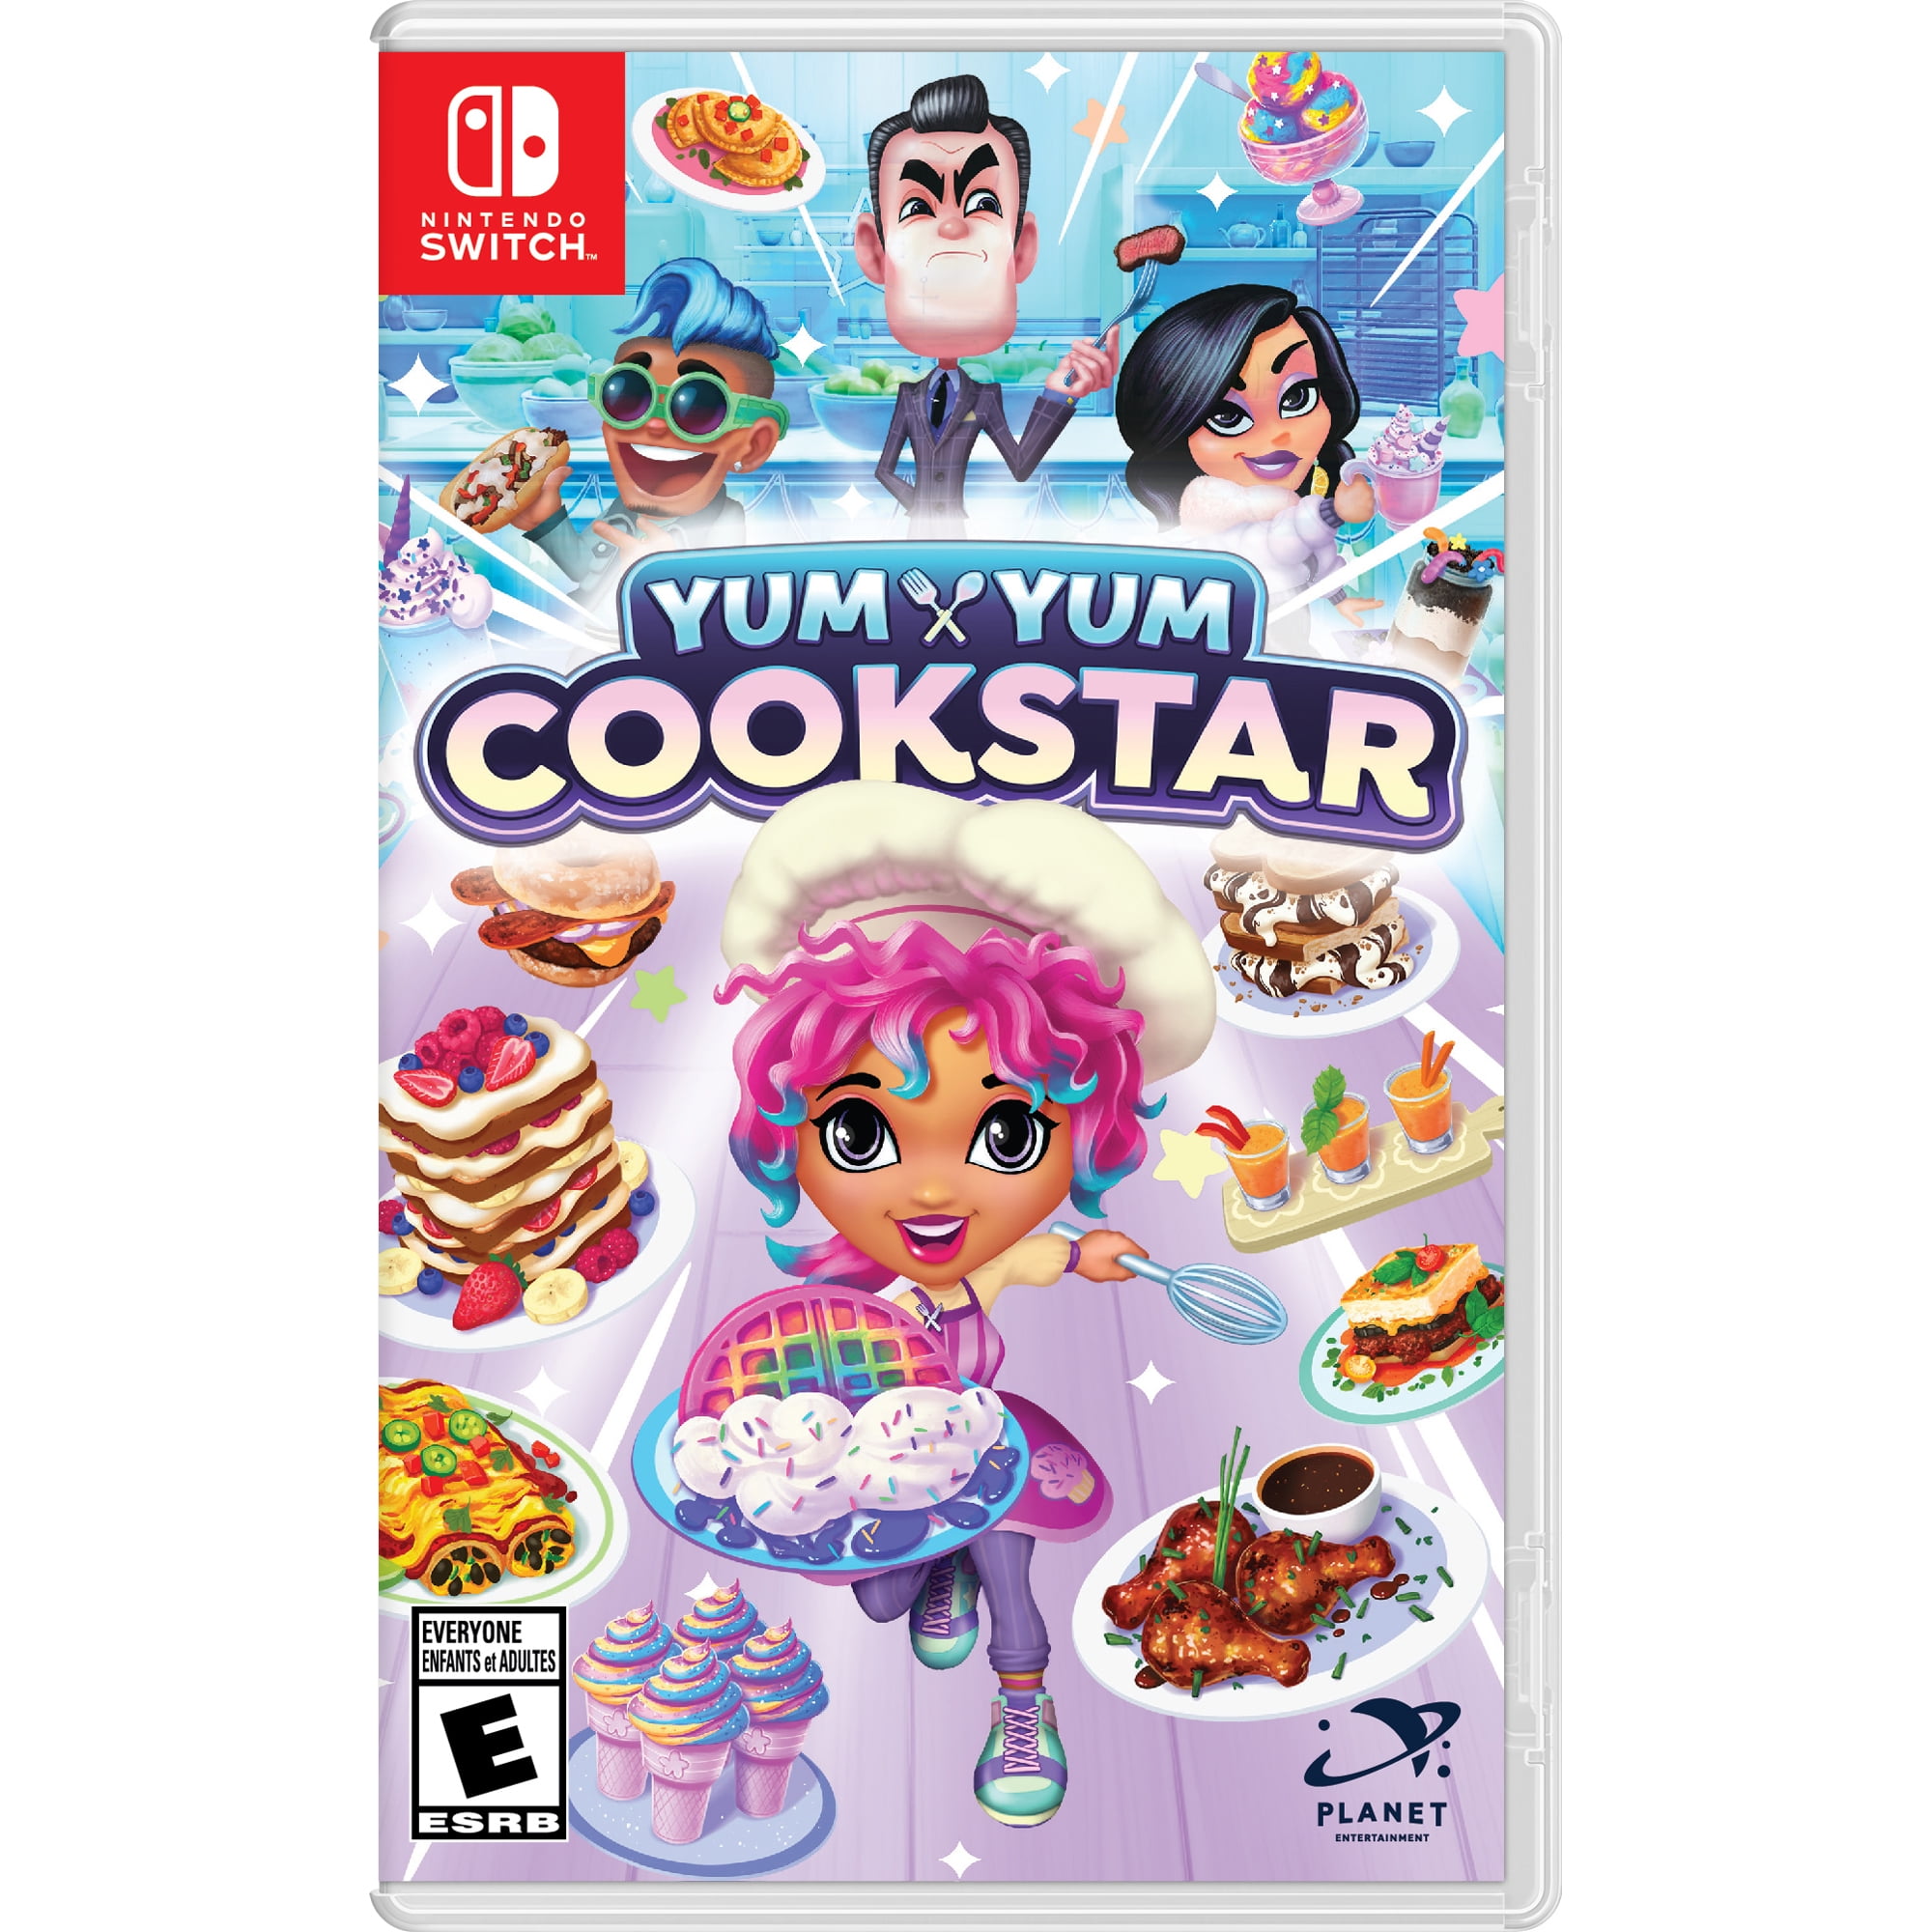 Picture of Planet Entertainment 860000154185 Yum Yum Cookstar Nintendo Switch Video Games